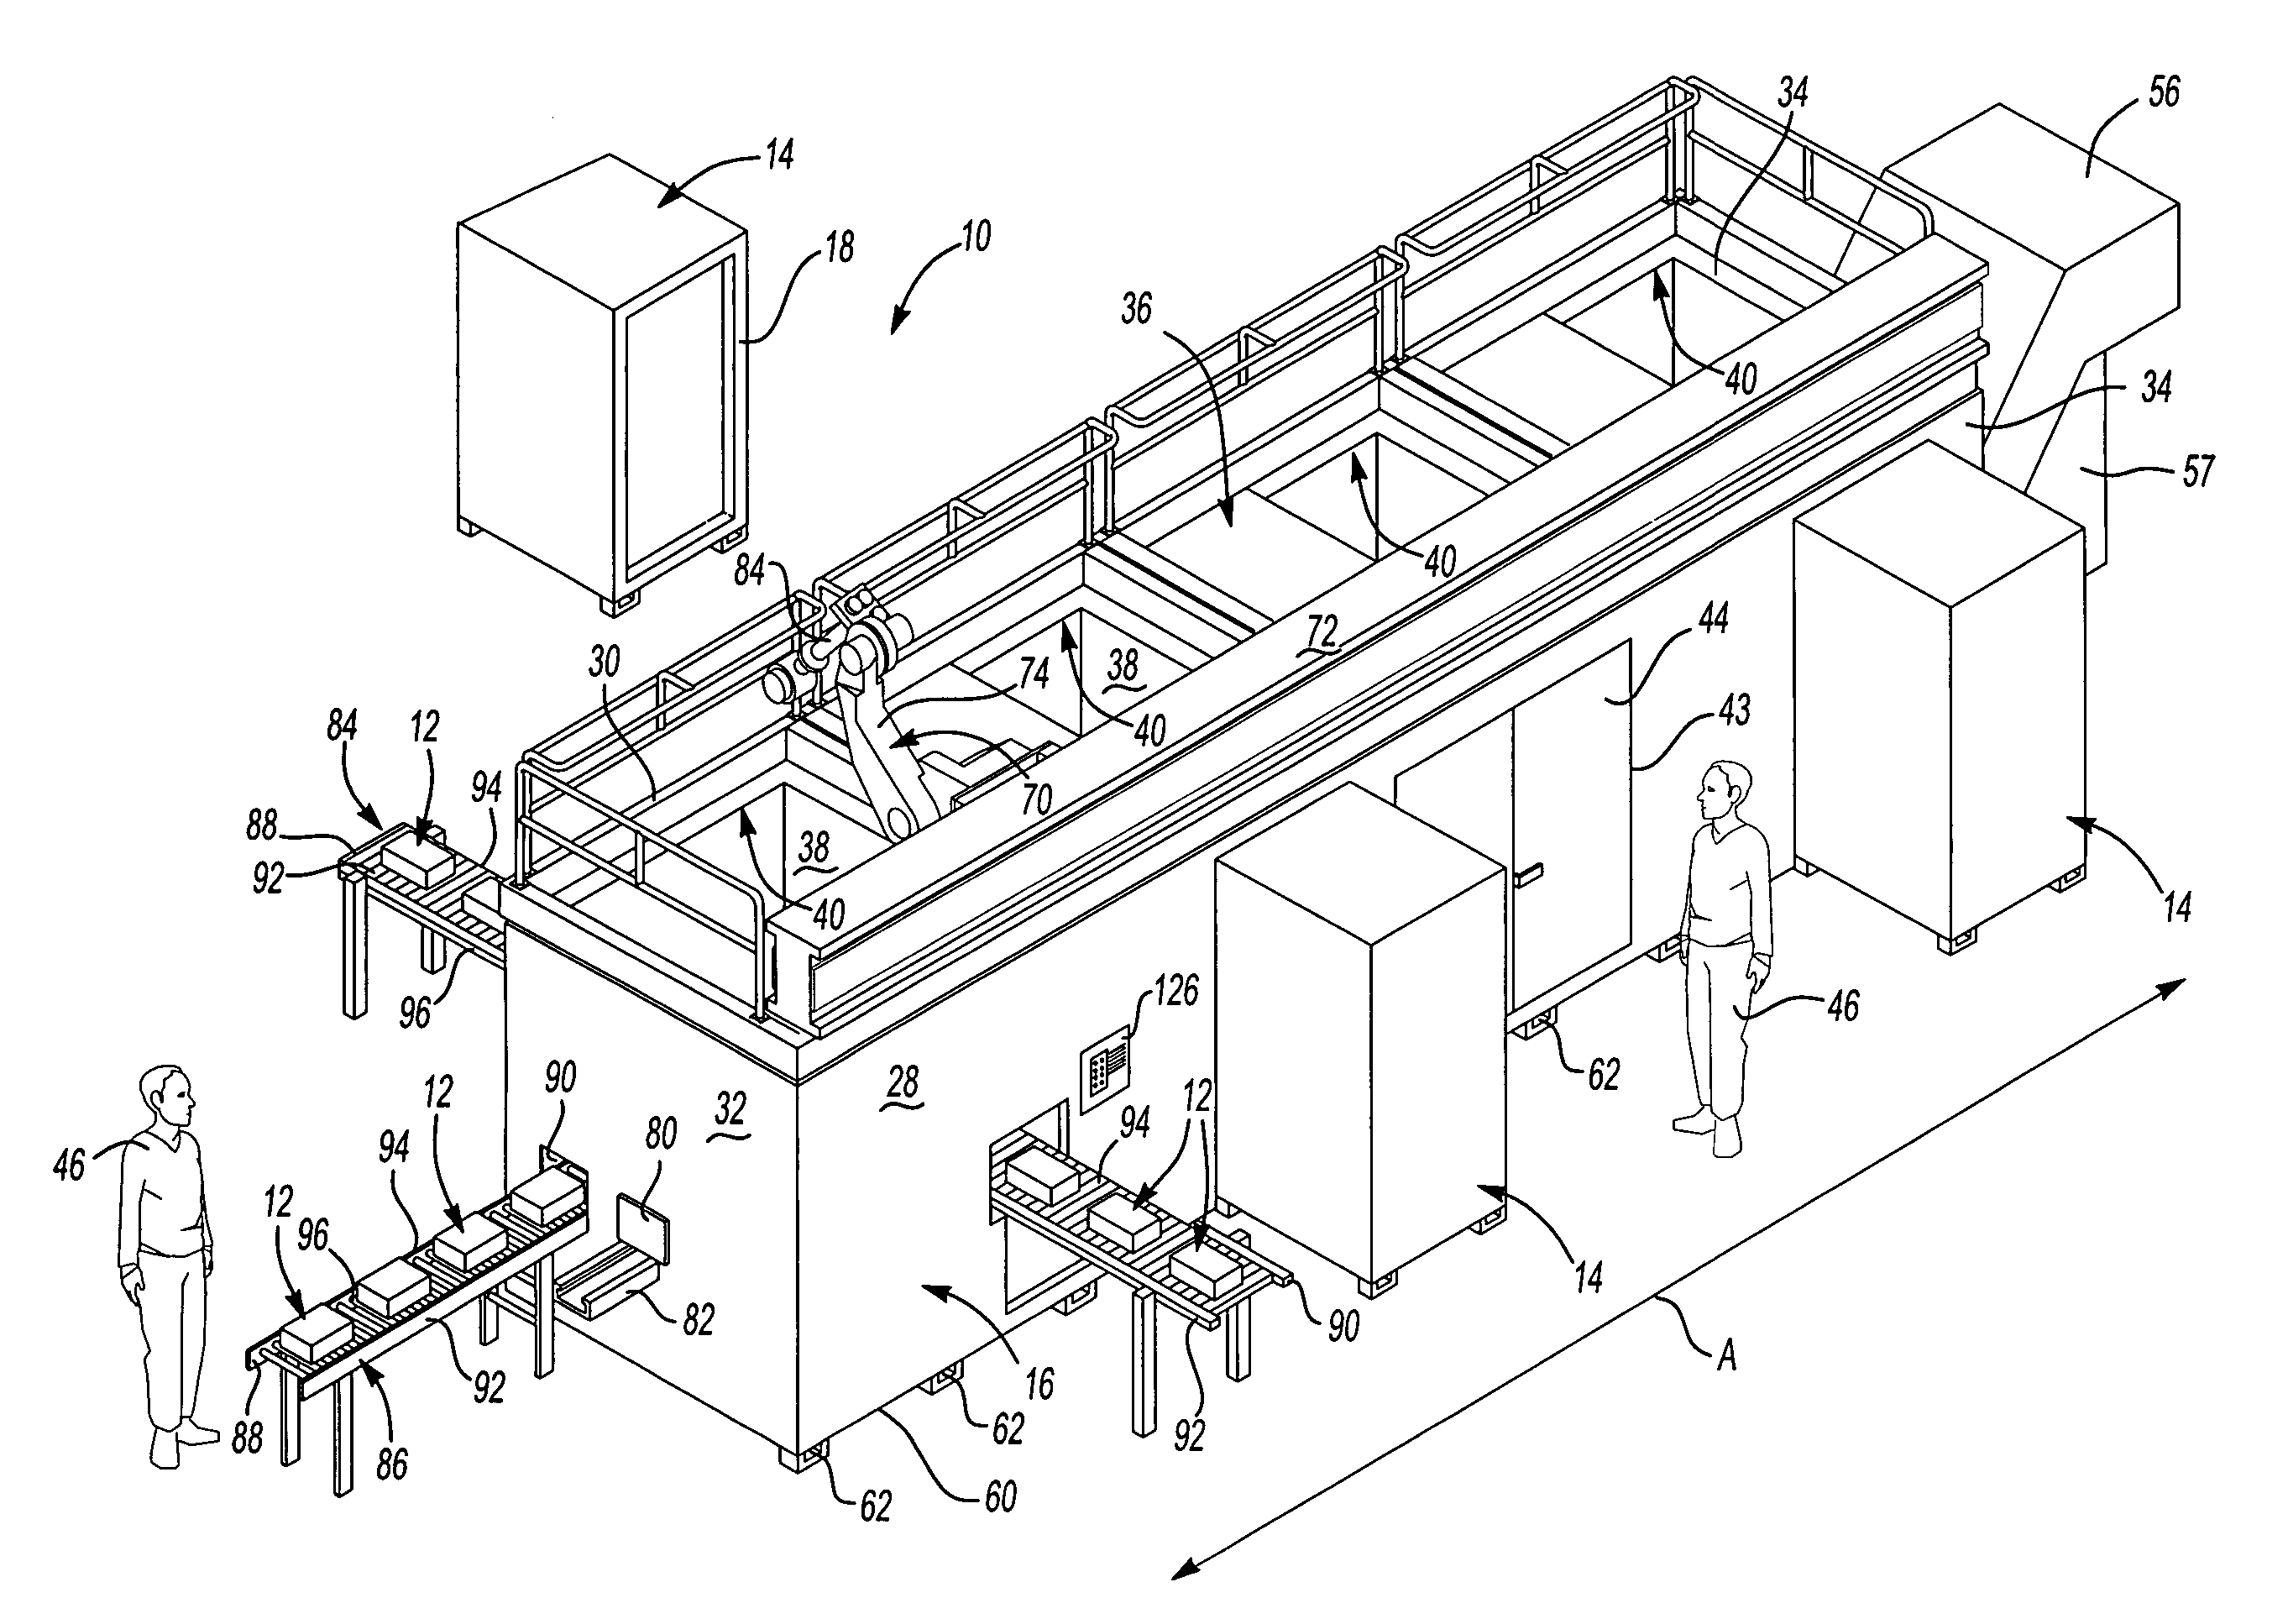 Integrated machining module for processing workpieces and a method of assembling the same